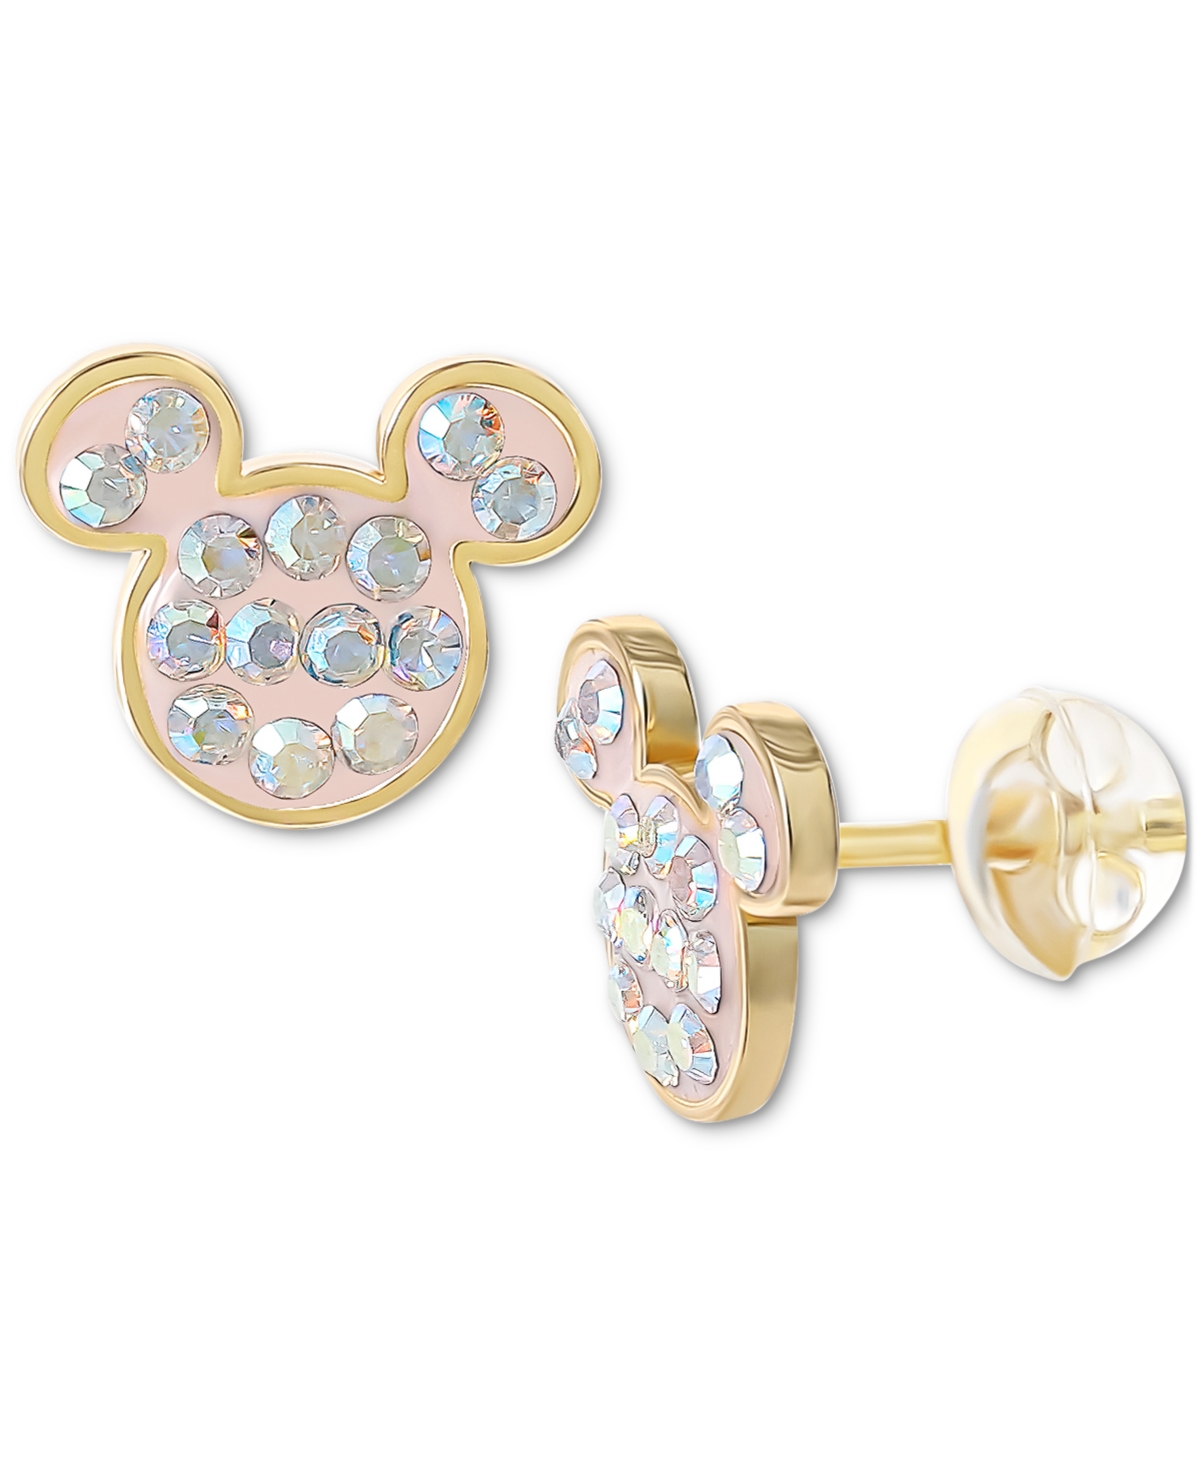 Crystal Mickey Mouse Stud Earrings in 18k Gold-Plated Sterling Silver - Gold Over Silver